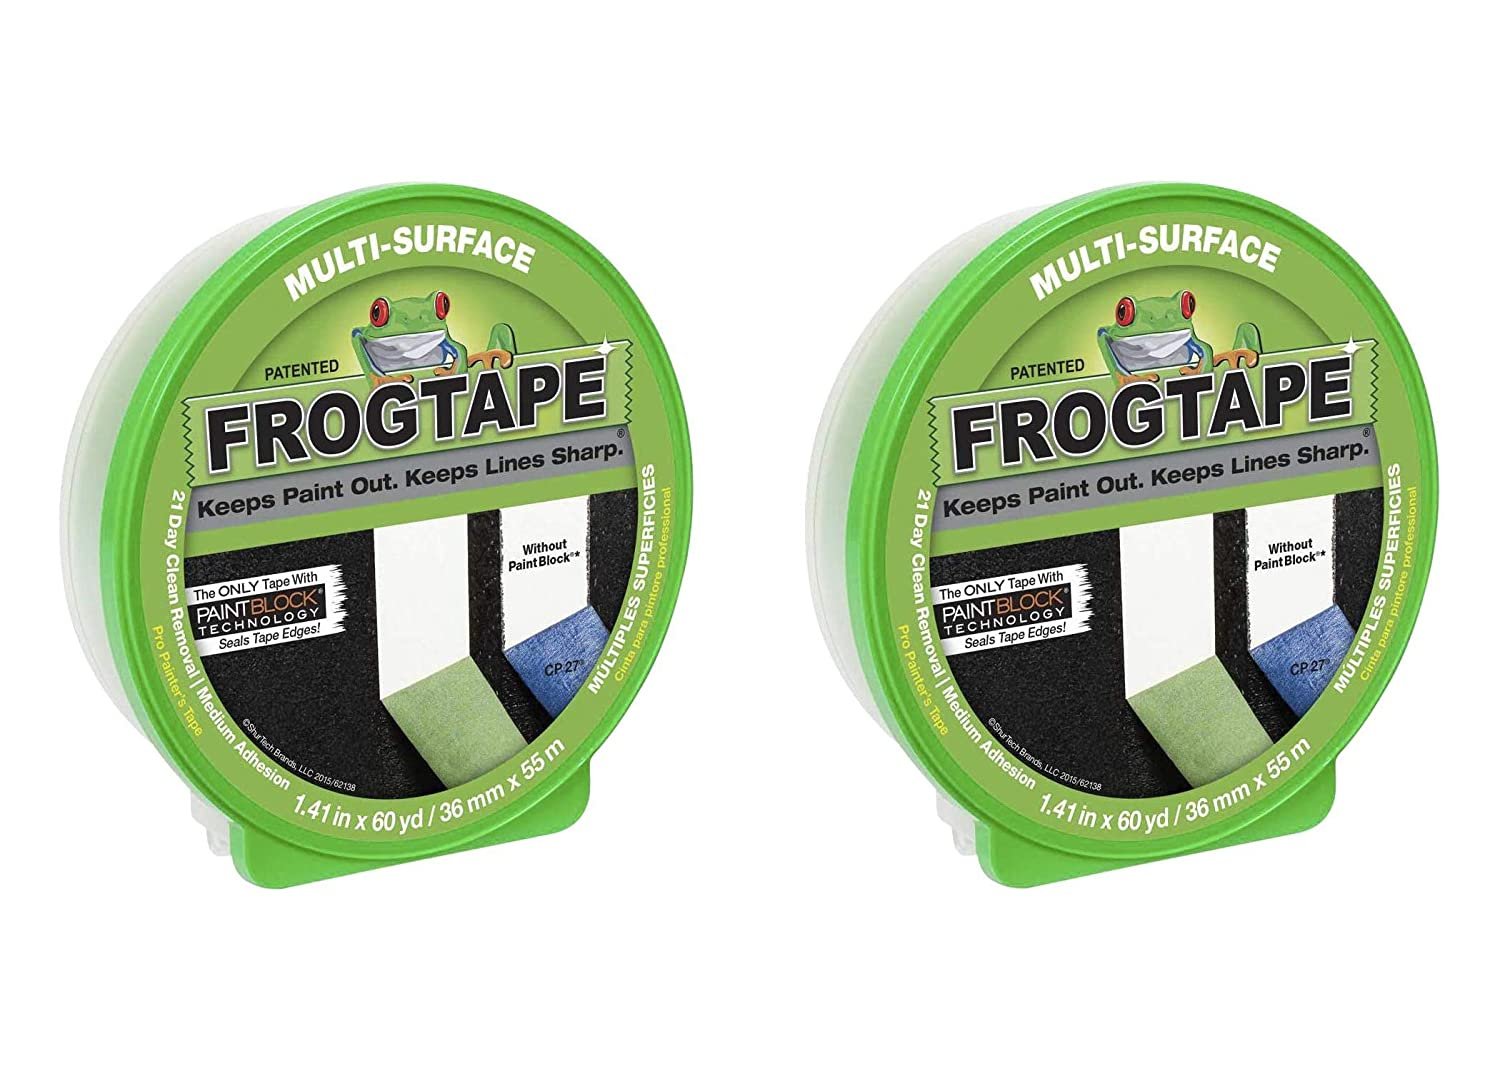 FROGTAPE 1358463 Multi-Surface Painter's Tape with PAINTBLOCK, Medium  Adhesion, 0.94 Wide x 60 Yards Long, Green, 2 Pack